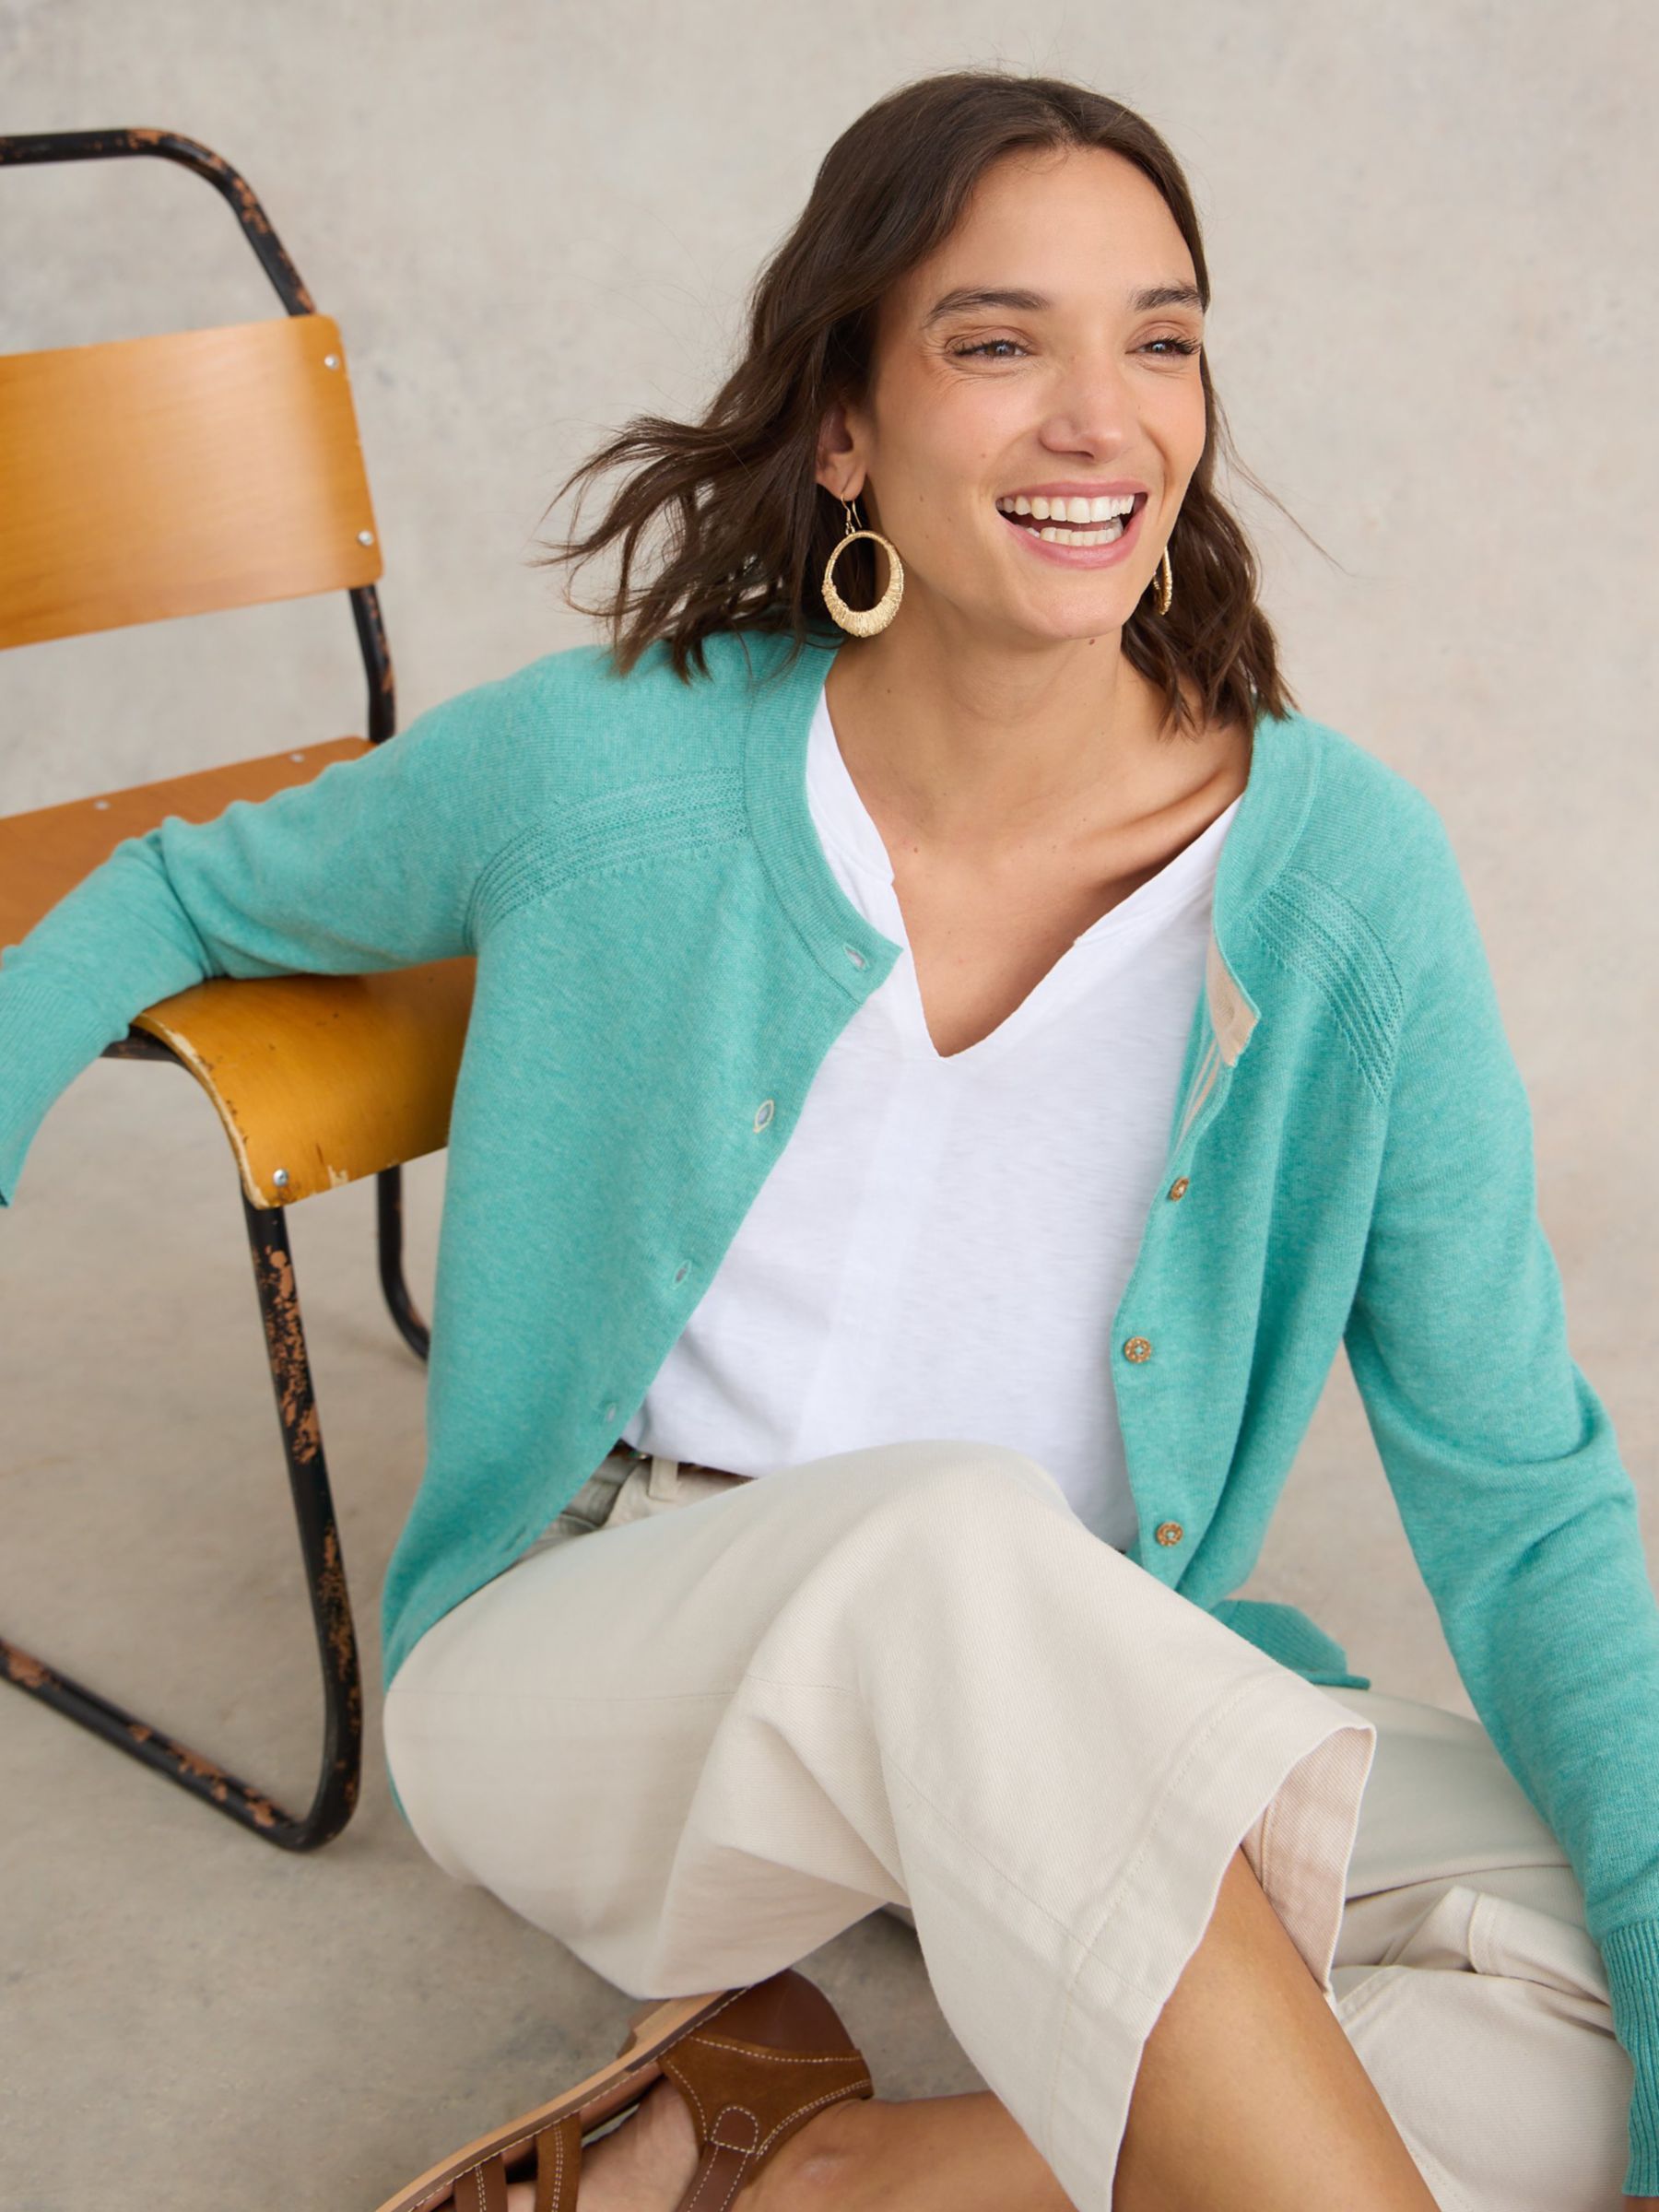 Buy White Stuff Lulu Cotton Button Up Cardigan, Mid Teal Online at johnlewis.com